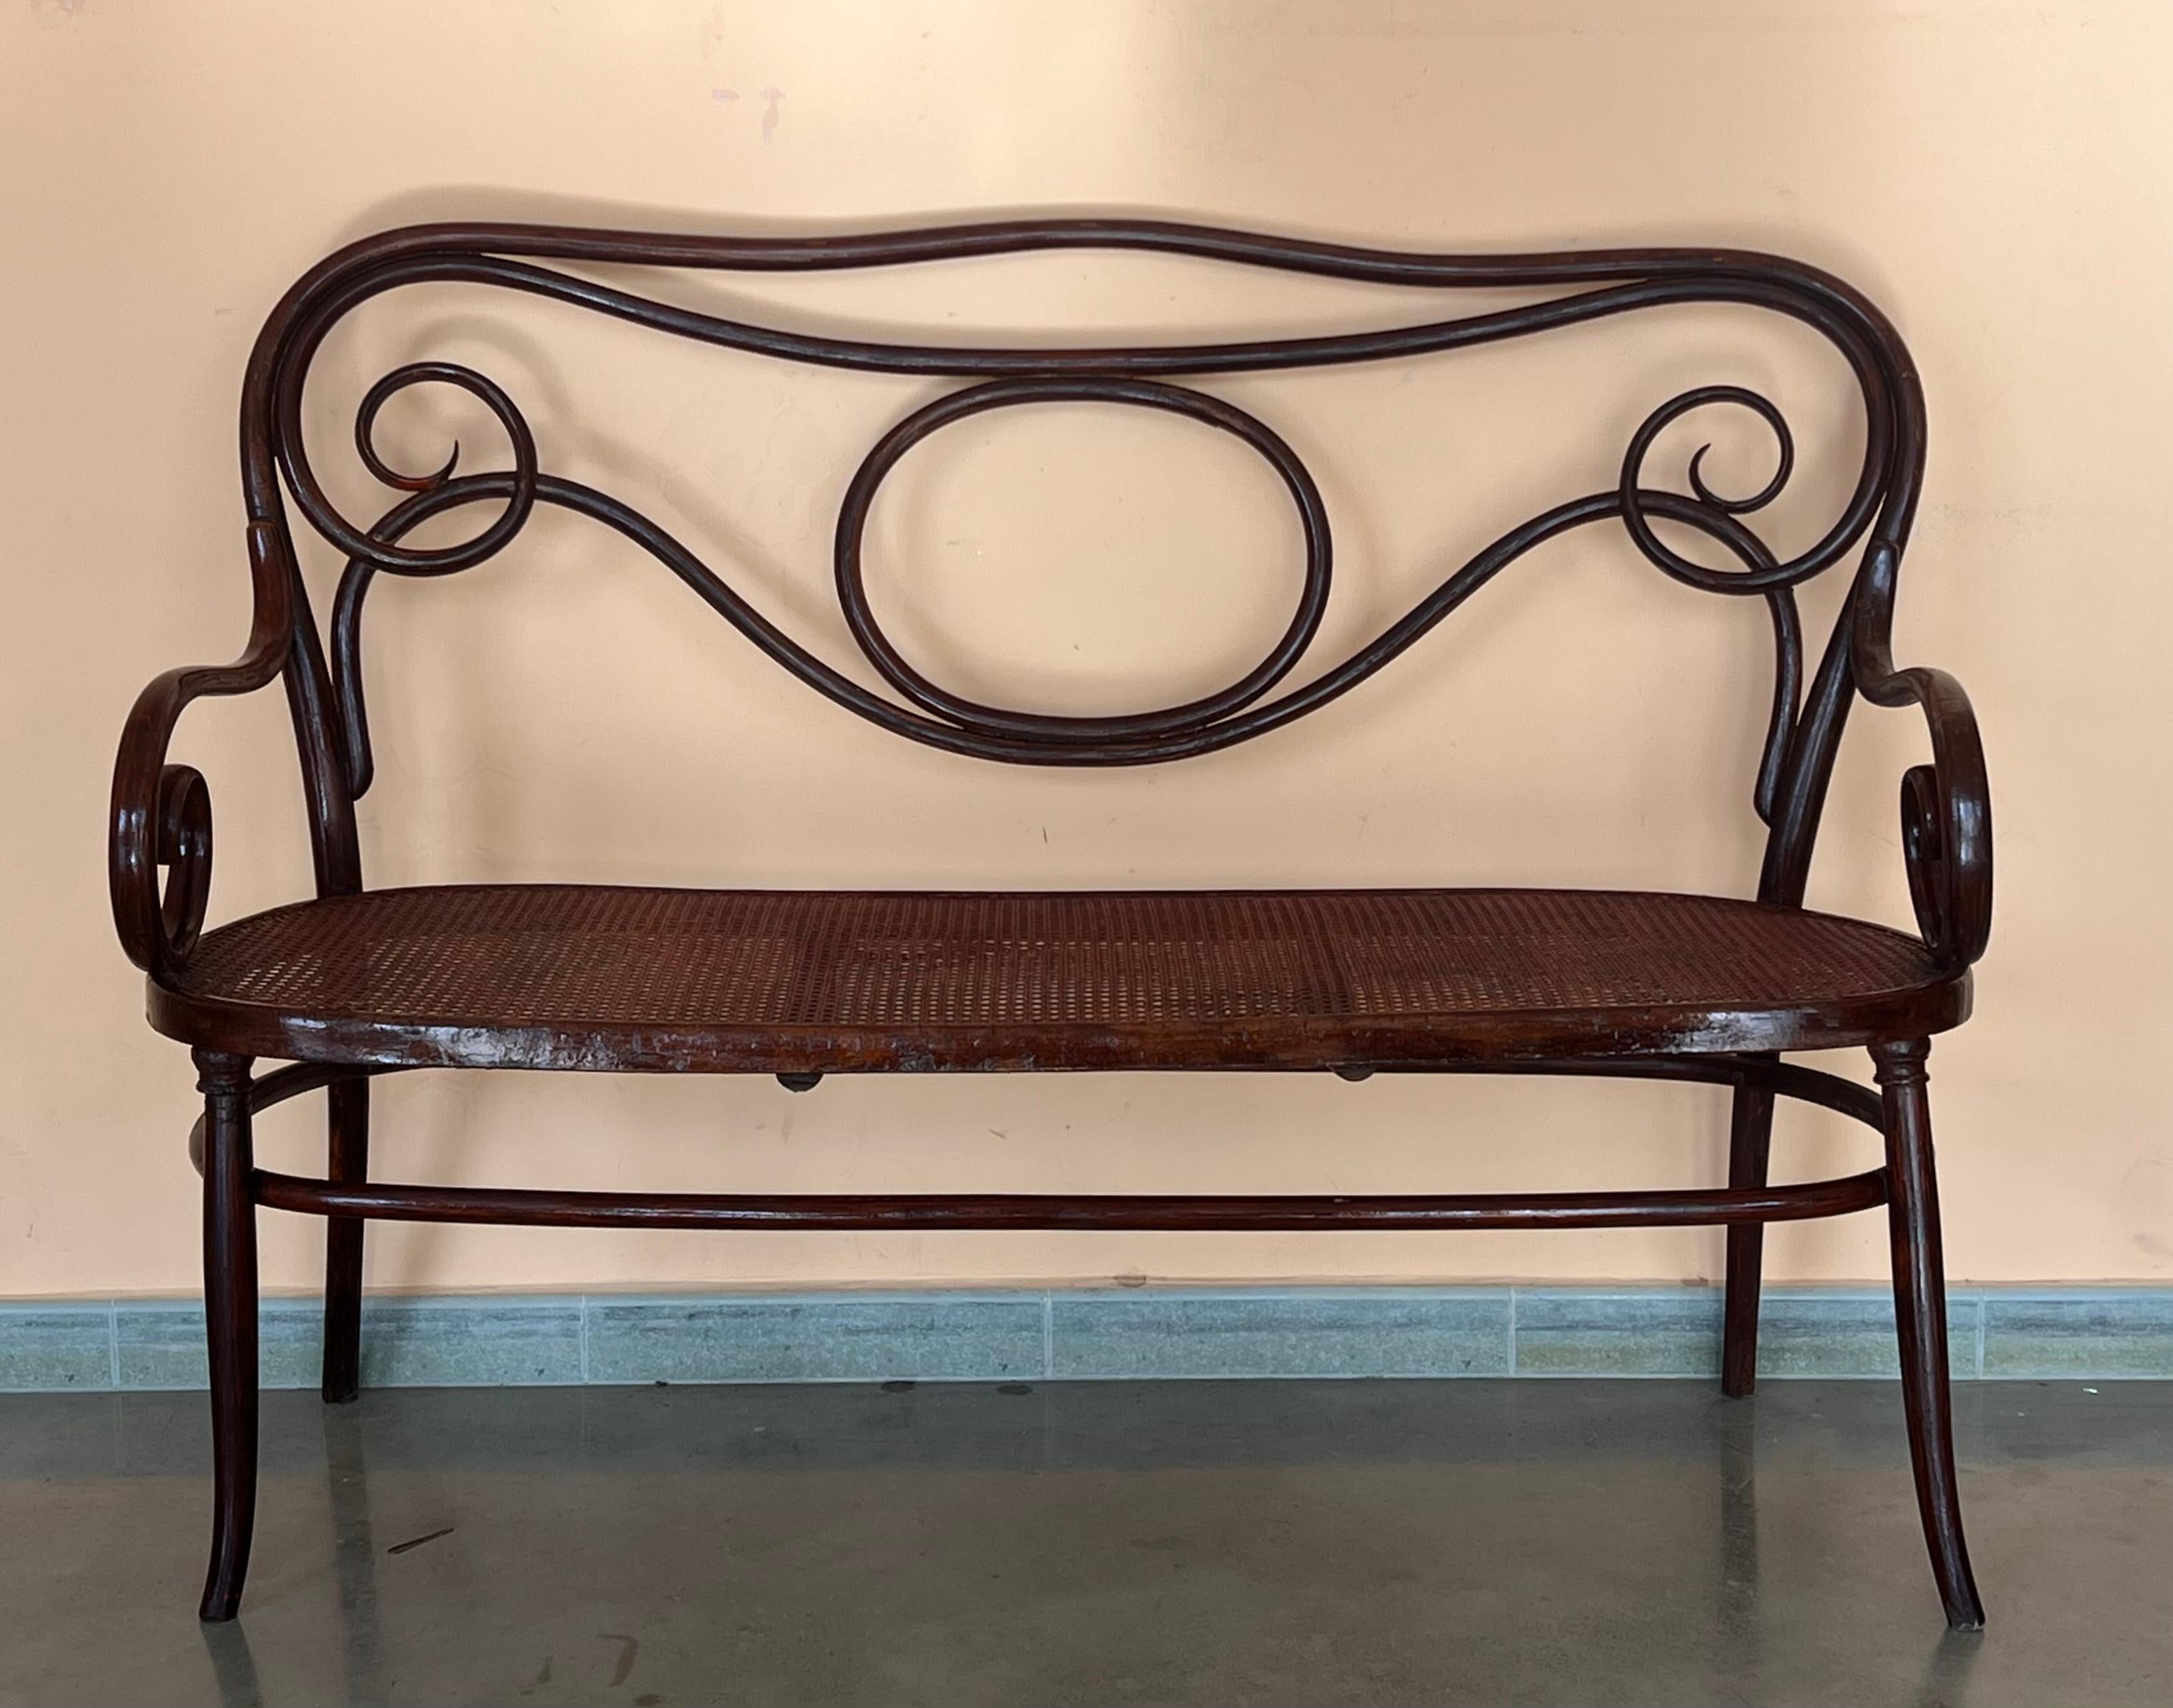 20th century bentwood sofa in the Thonet style, circa 1925, caned seat

This sofa it´s very heavy and sturdy.

Height from the floor to the arm : 26.77in